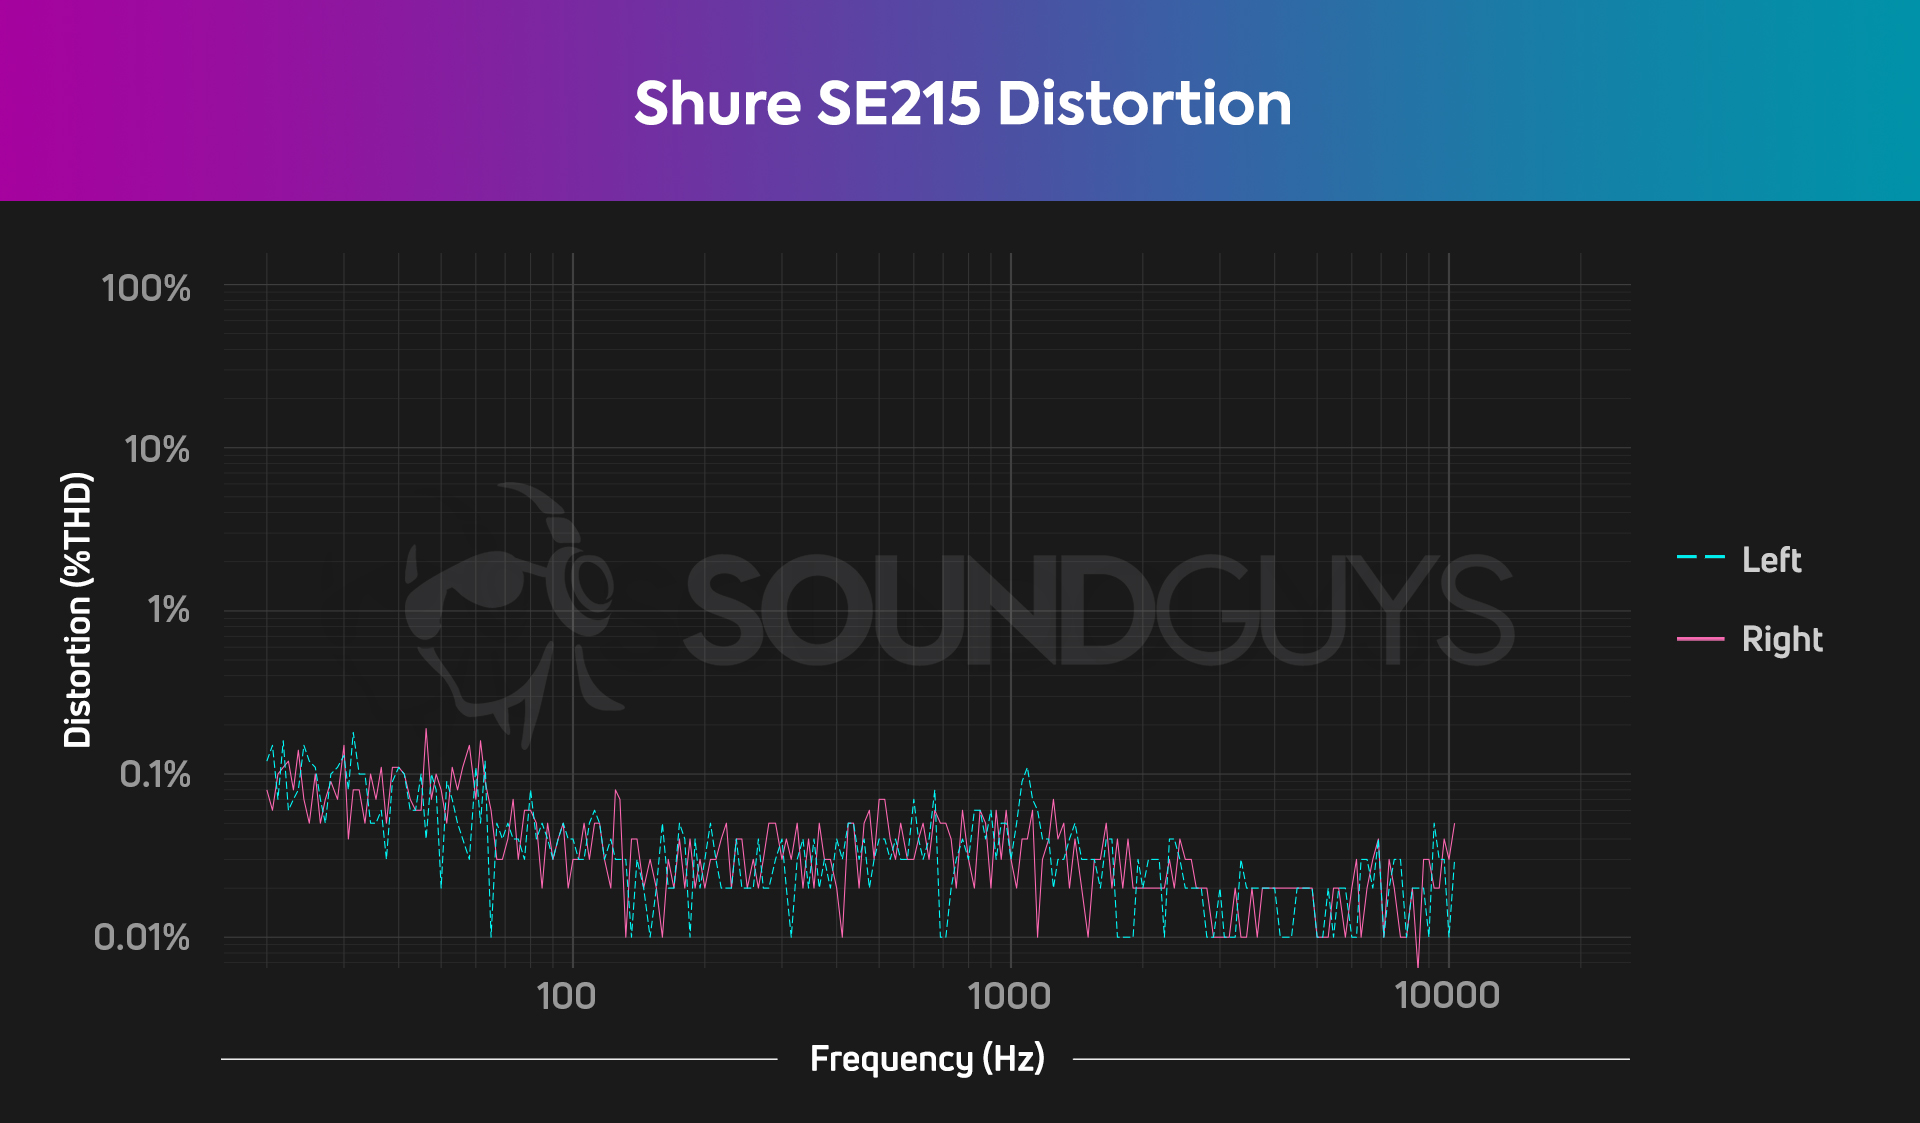 This chart illustrates the Shure SE215 distortion (THD) performance, demonstrating that listeners will be hard-pressed to perceive any distortion.